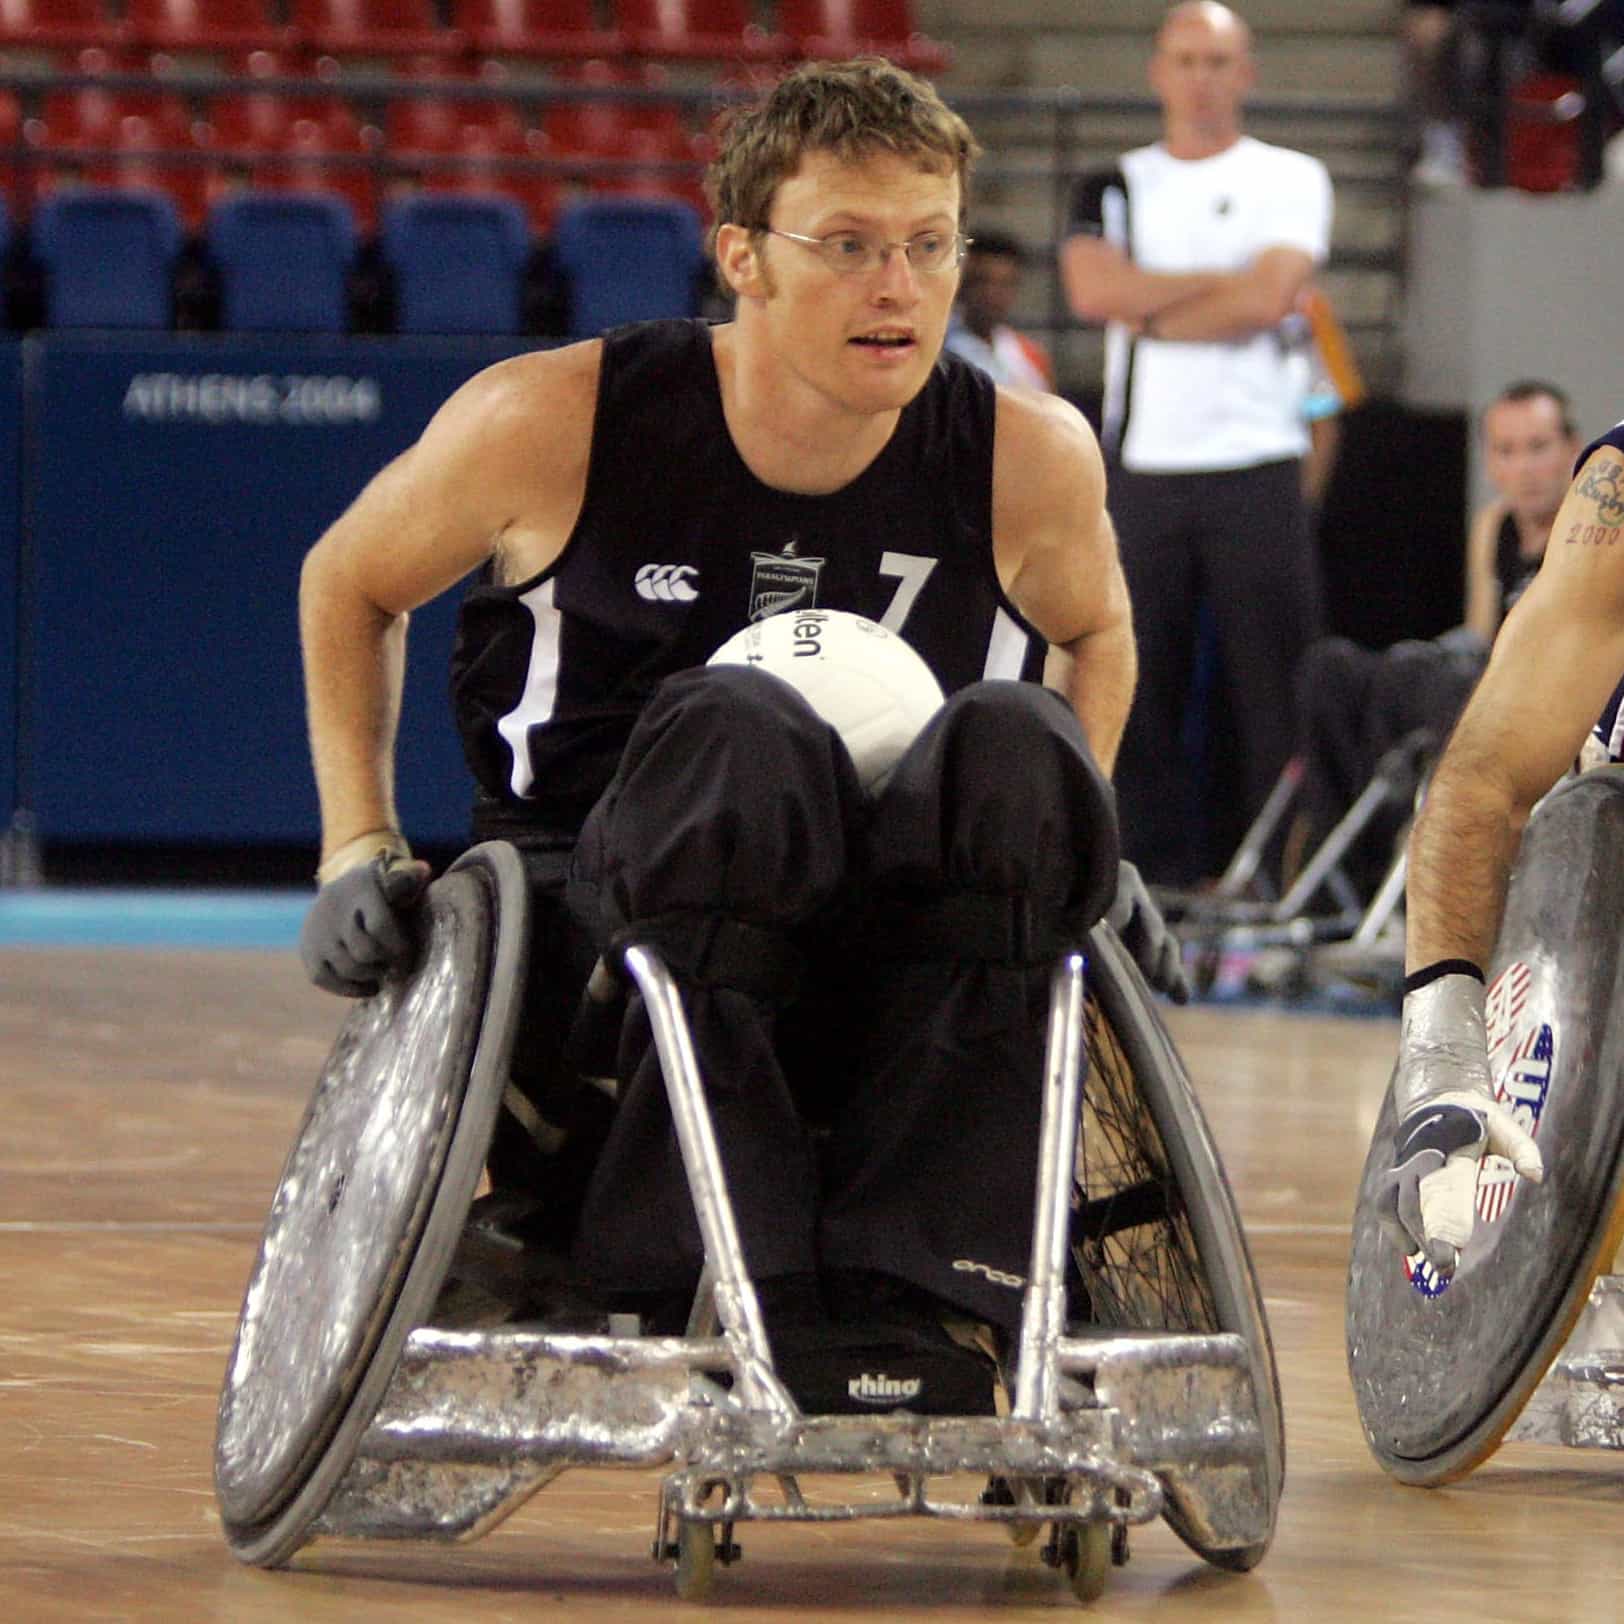 Tim Johnson during the Wheelchair Rugby match between USA and New Zealand at the Indoor Arena, Athens, Greece on Monday, 20 September, 2004. The Wheelblacks lost the match, 32 - 35.
PHOTO: Hannah Johnston/PHOTOSPORT